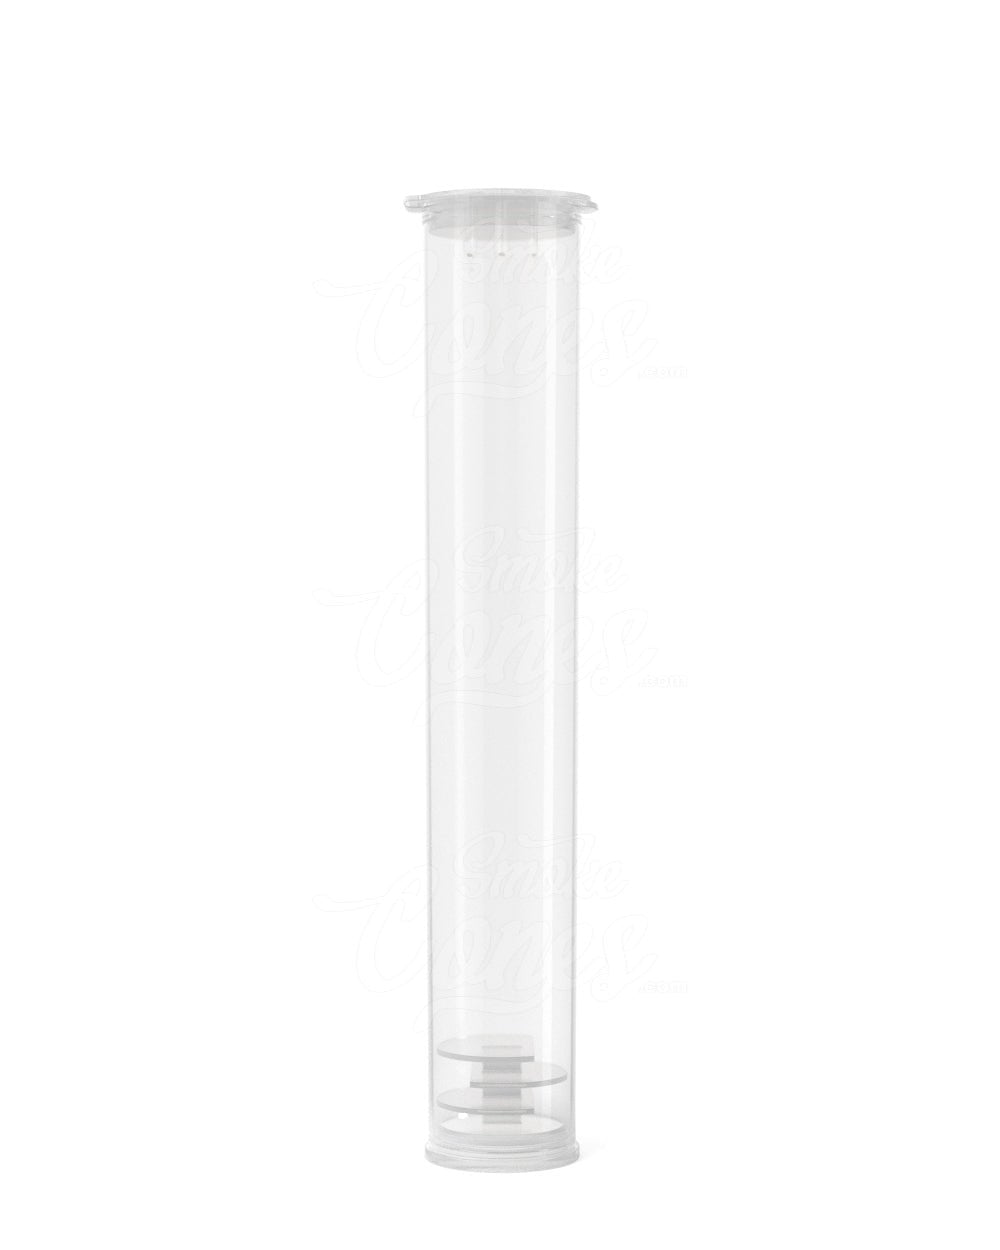 125mm Clear Transparent Thingymajiggy Pre-Roll Storage Tubes with Ash Trap 400/Box - 3